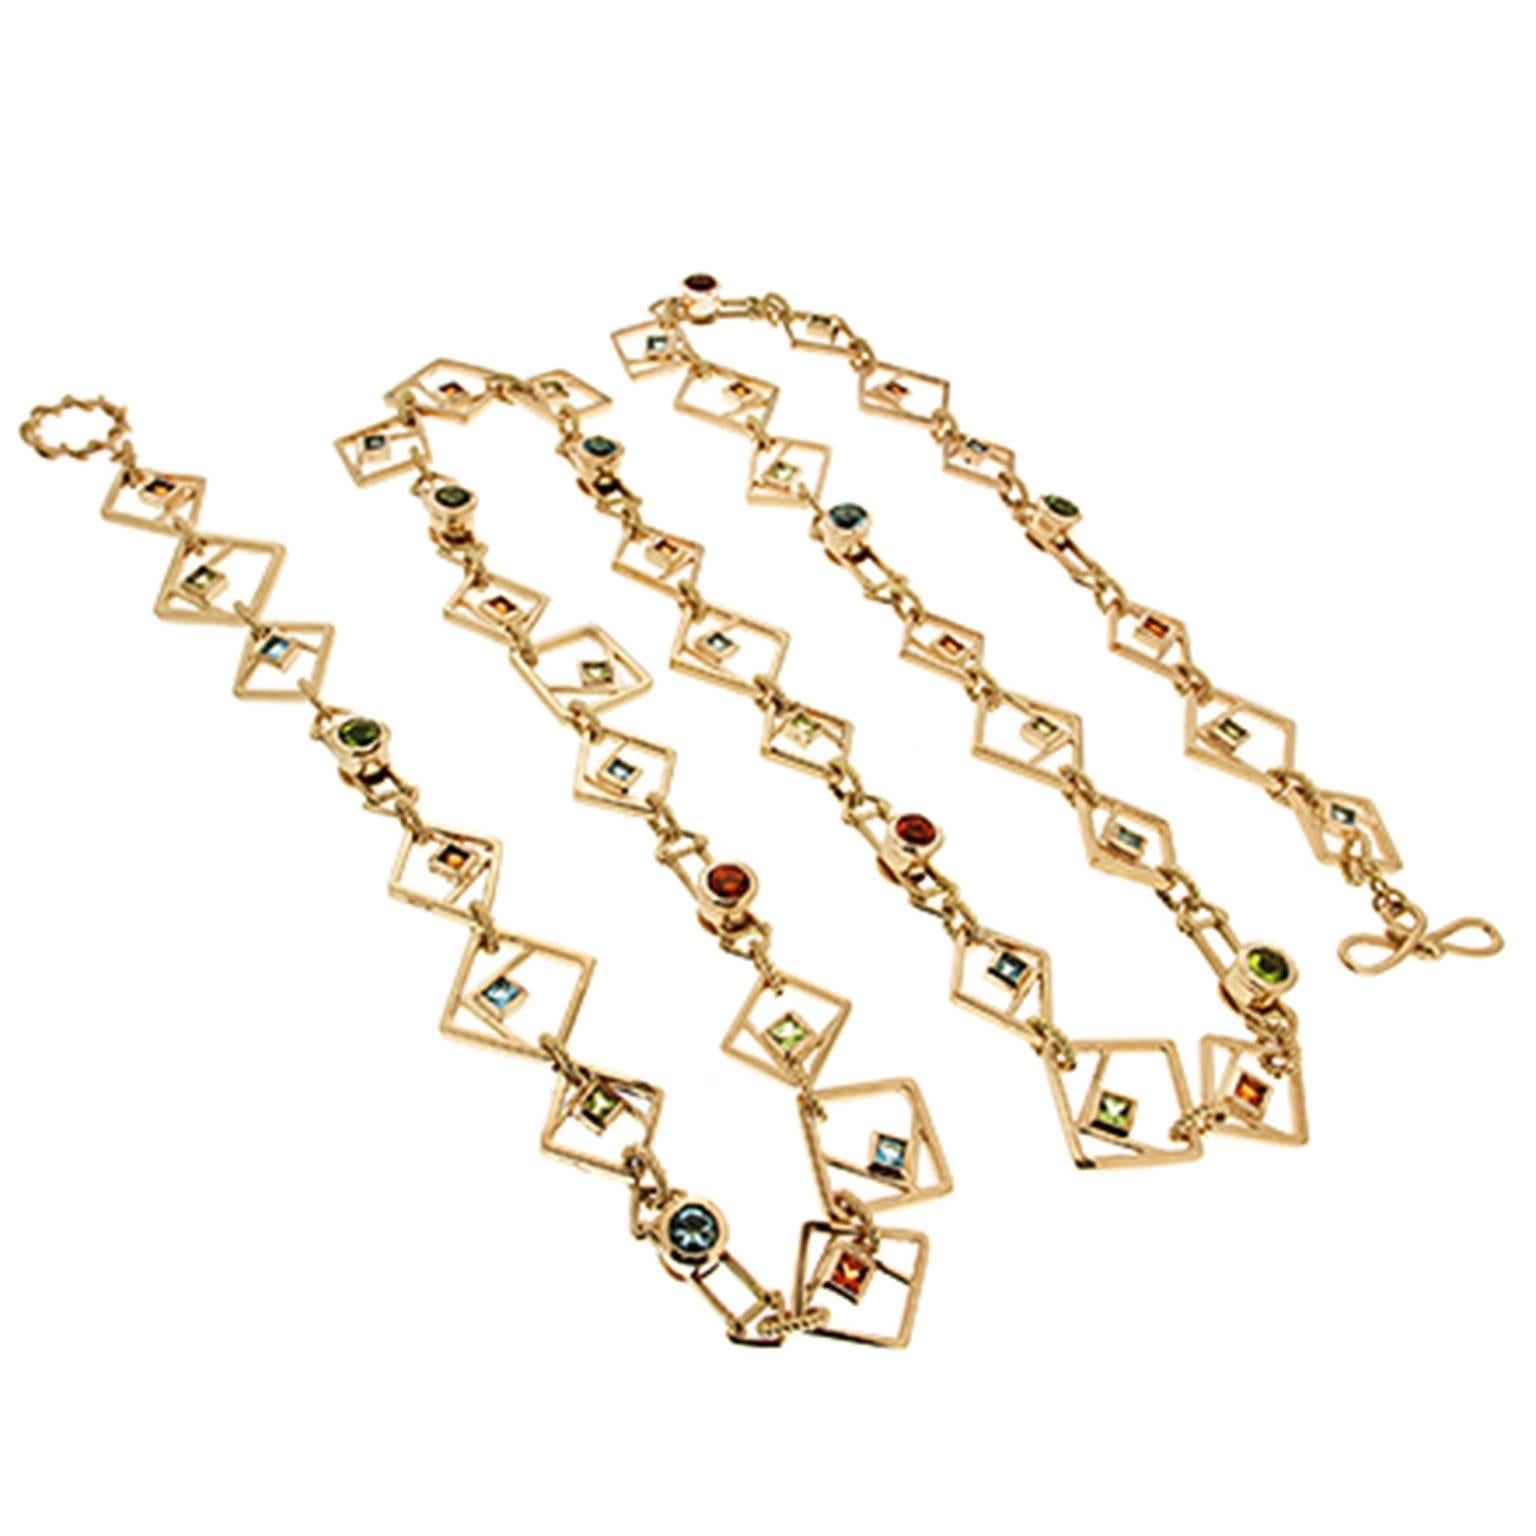 This unique necklace features geometric square shapes and forms with the accents of expert selected faceted Peridot, Blue Topaz and Citrine stones in various shapes and sizes. The necklace is finished in 18kt yellow gold with our signature ring and